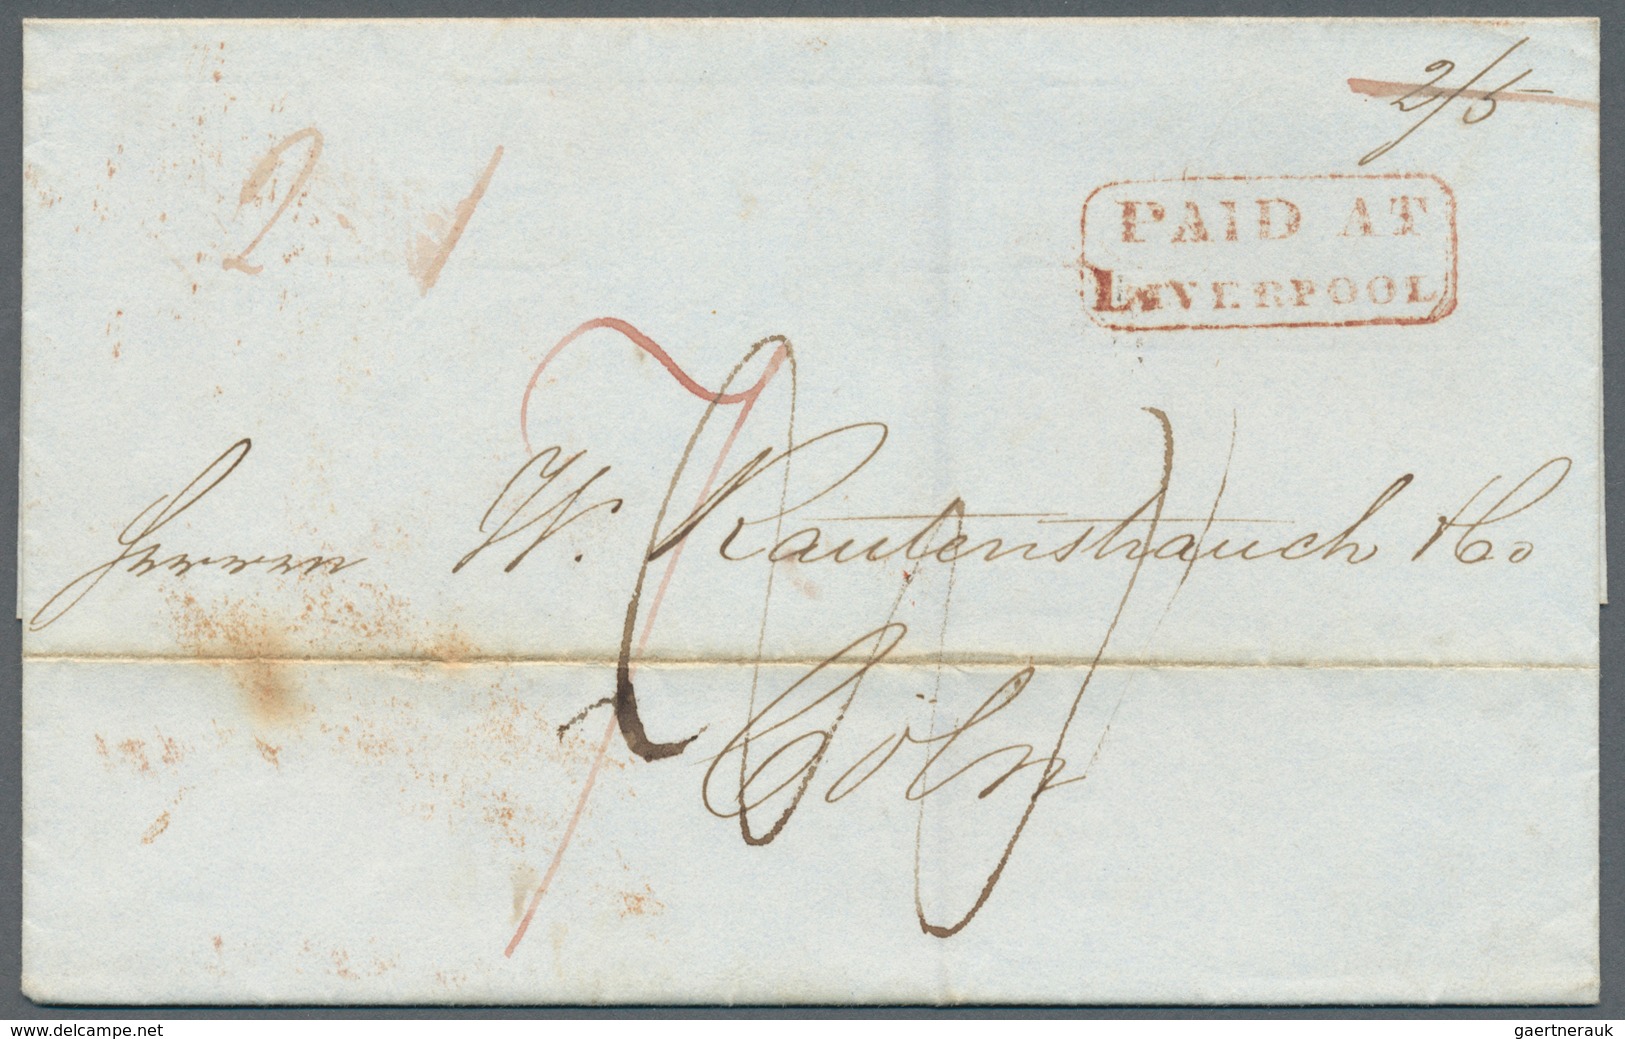 Europa: 1769/1869, European Transit Mail, collection of apprx. 65 (mainly stampless) covers, showing